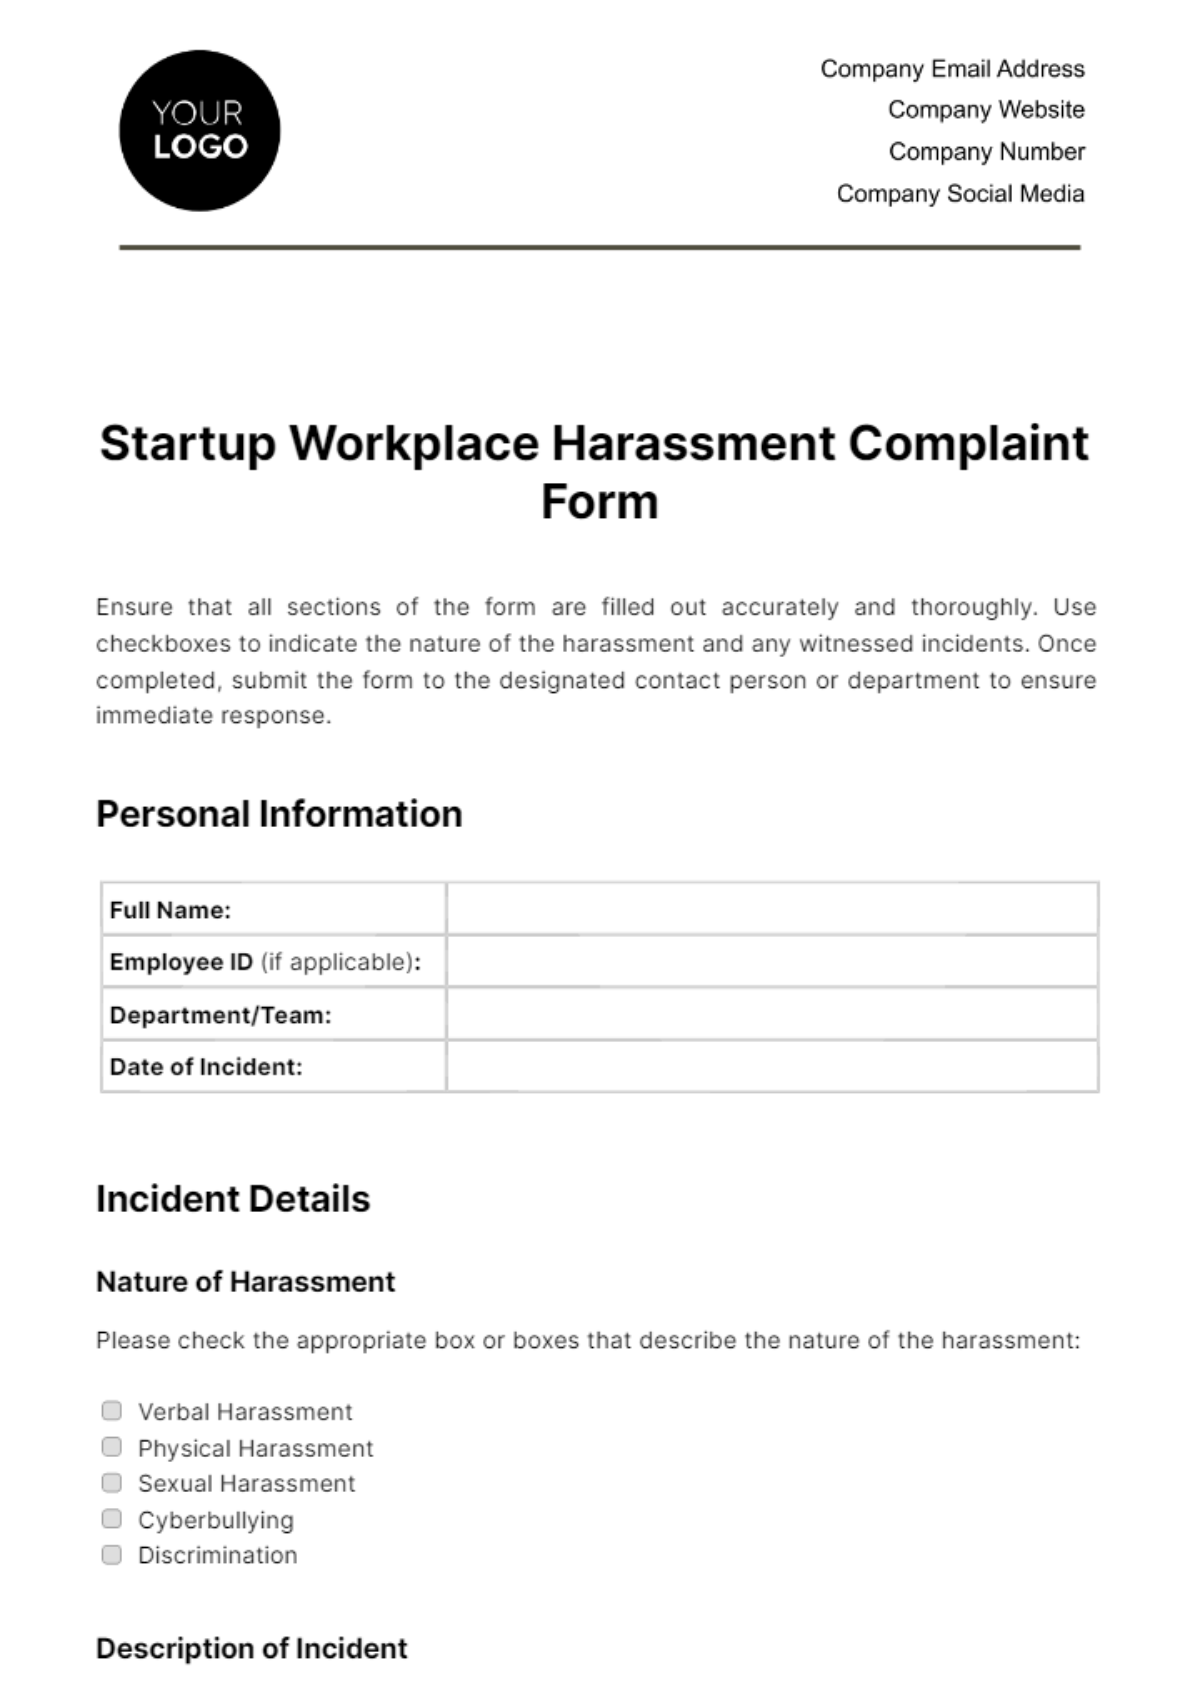 Free Startup Workplace Harassment Complaint Form Template